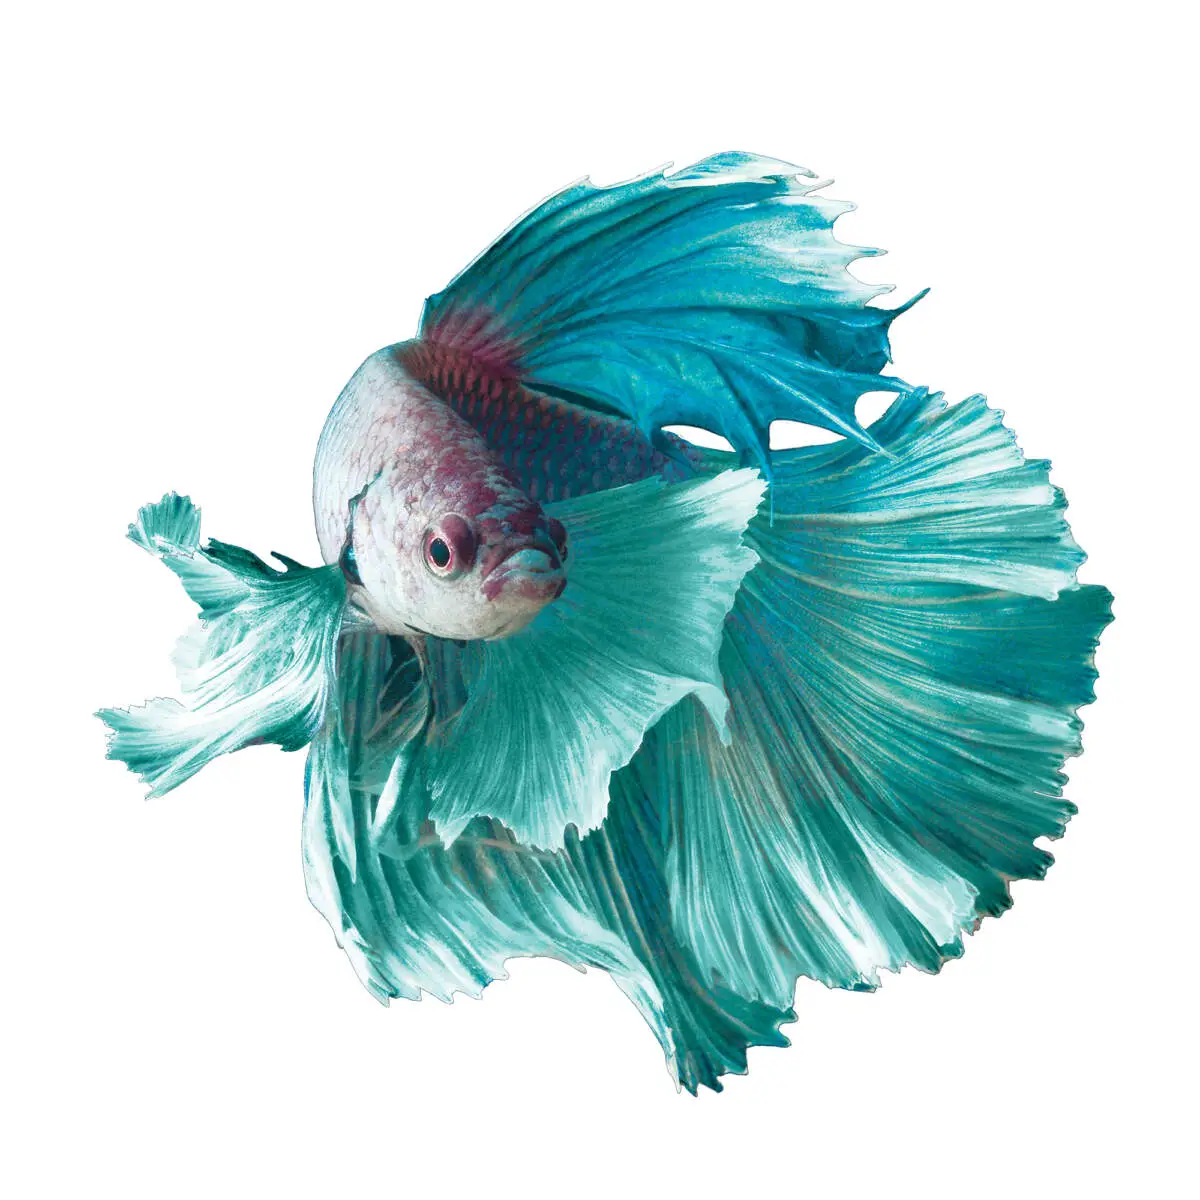 The Fascinating World of Betta Fish in Thailand